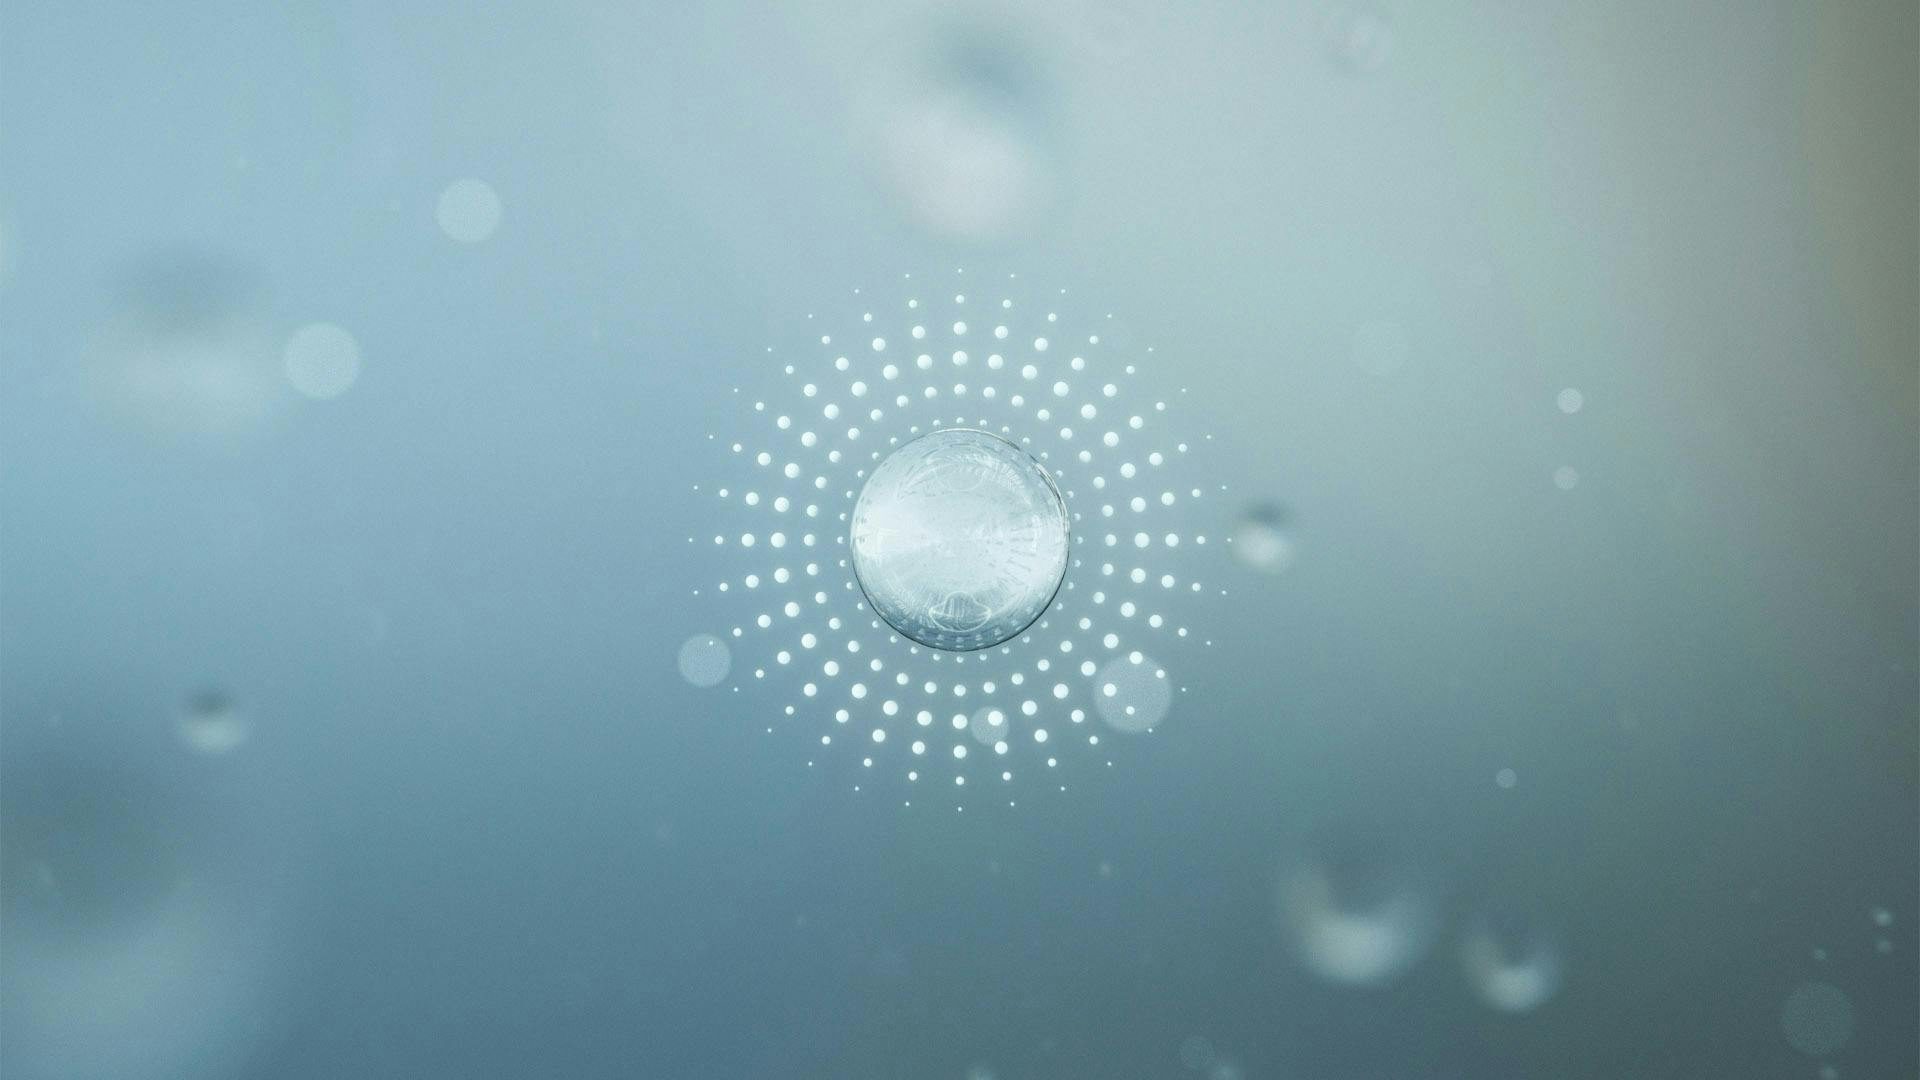 Bubbles in a blue enivorment with depth of field. A field of dots around the bubble in the center.